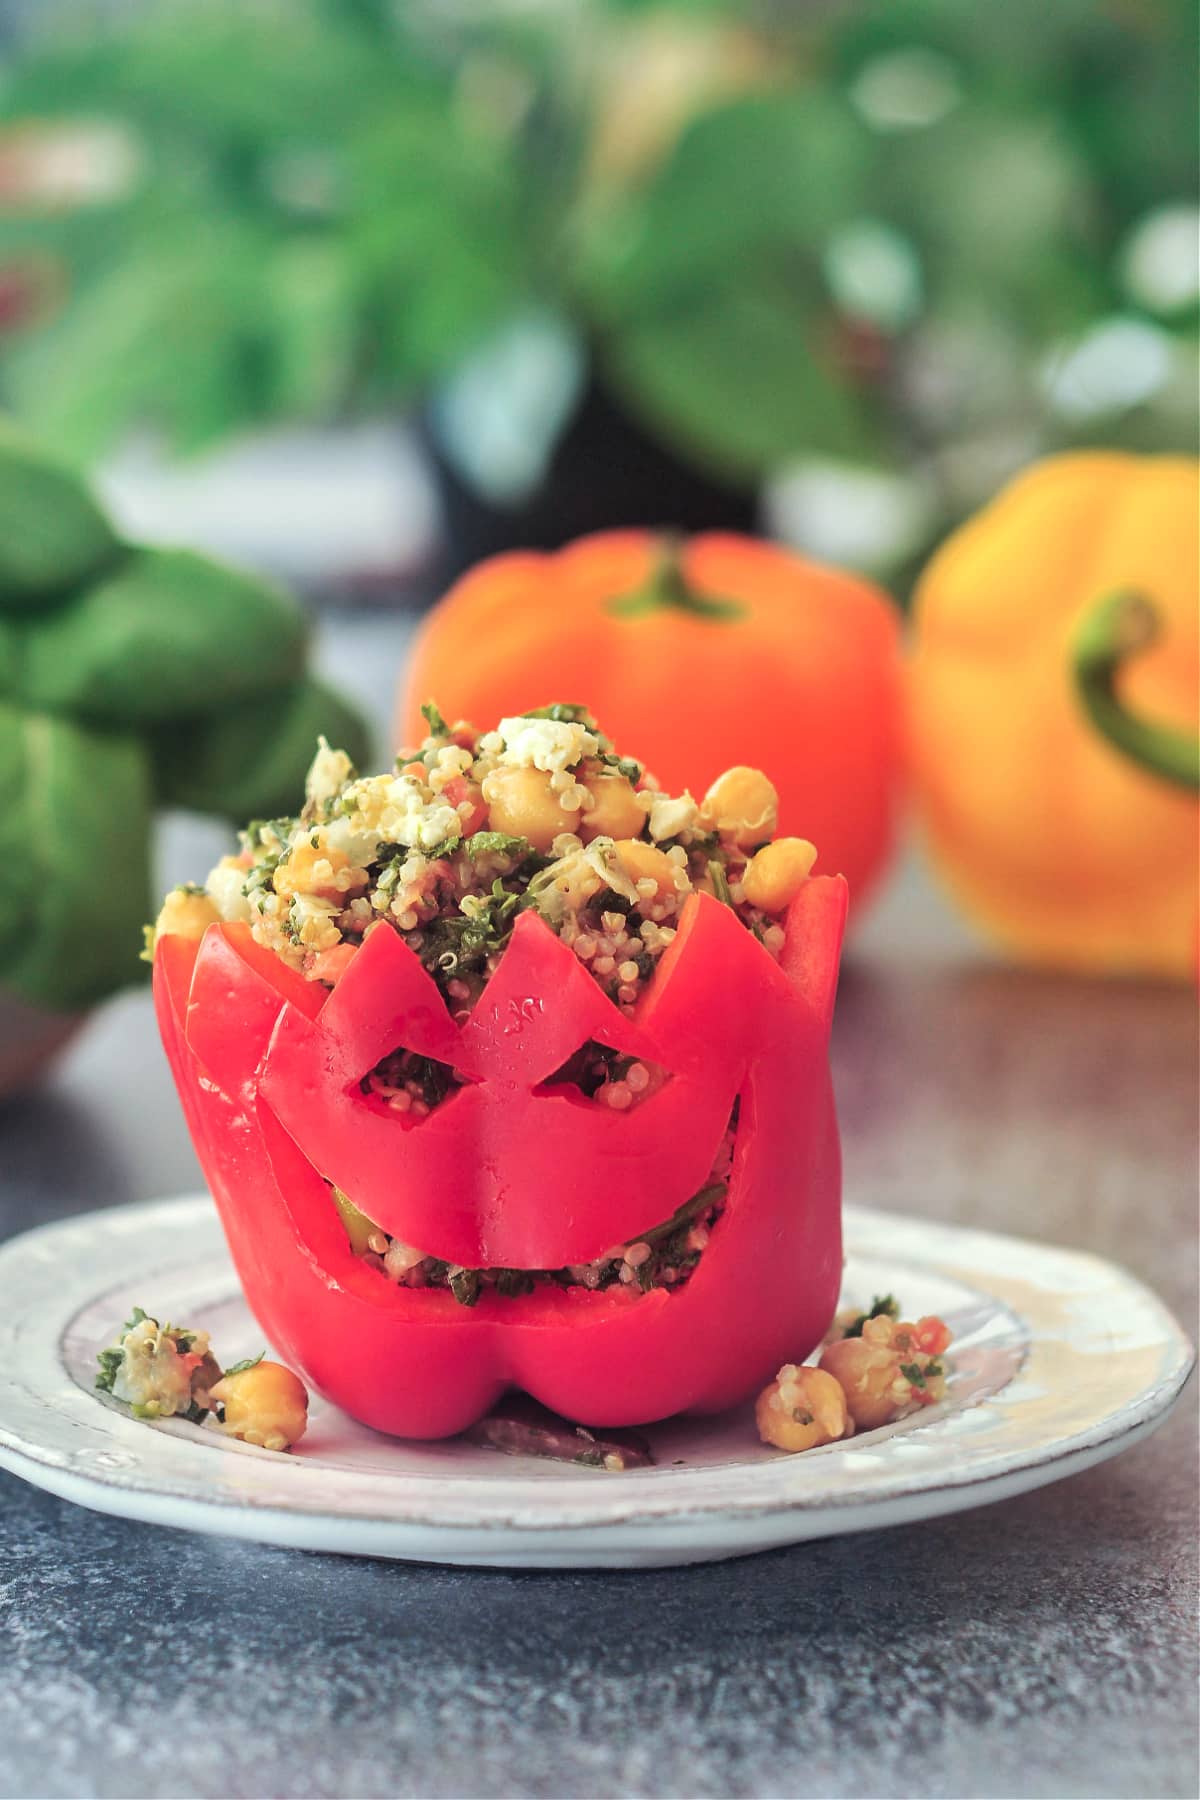 A red bell pepper filled with chickpea tabbouleh salad sits upright on a rustic white plate. The bell pepper has a jack o lantern face carved into the side. An orange and a yellow bell pepper and a bowl of greens sits in background, blurred slightly.